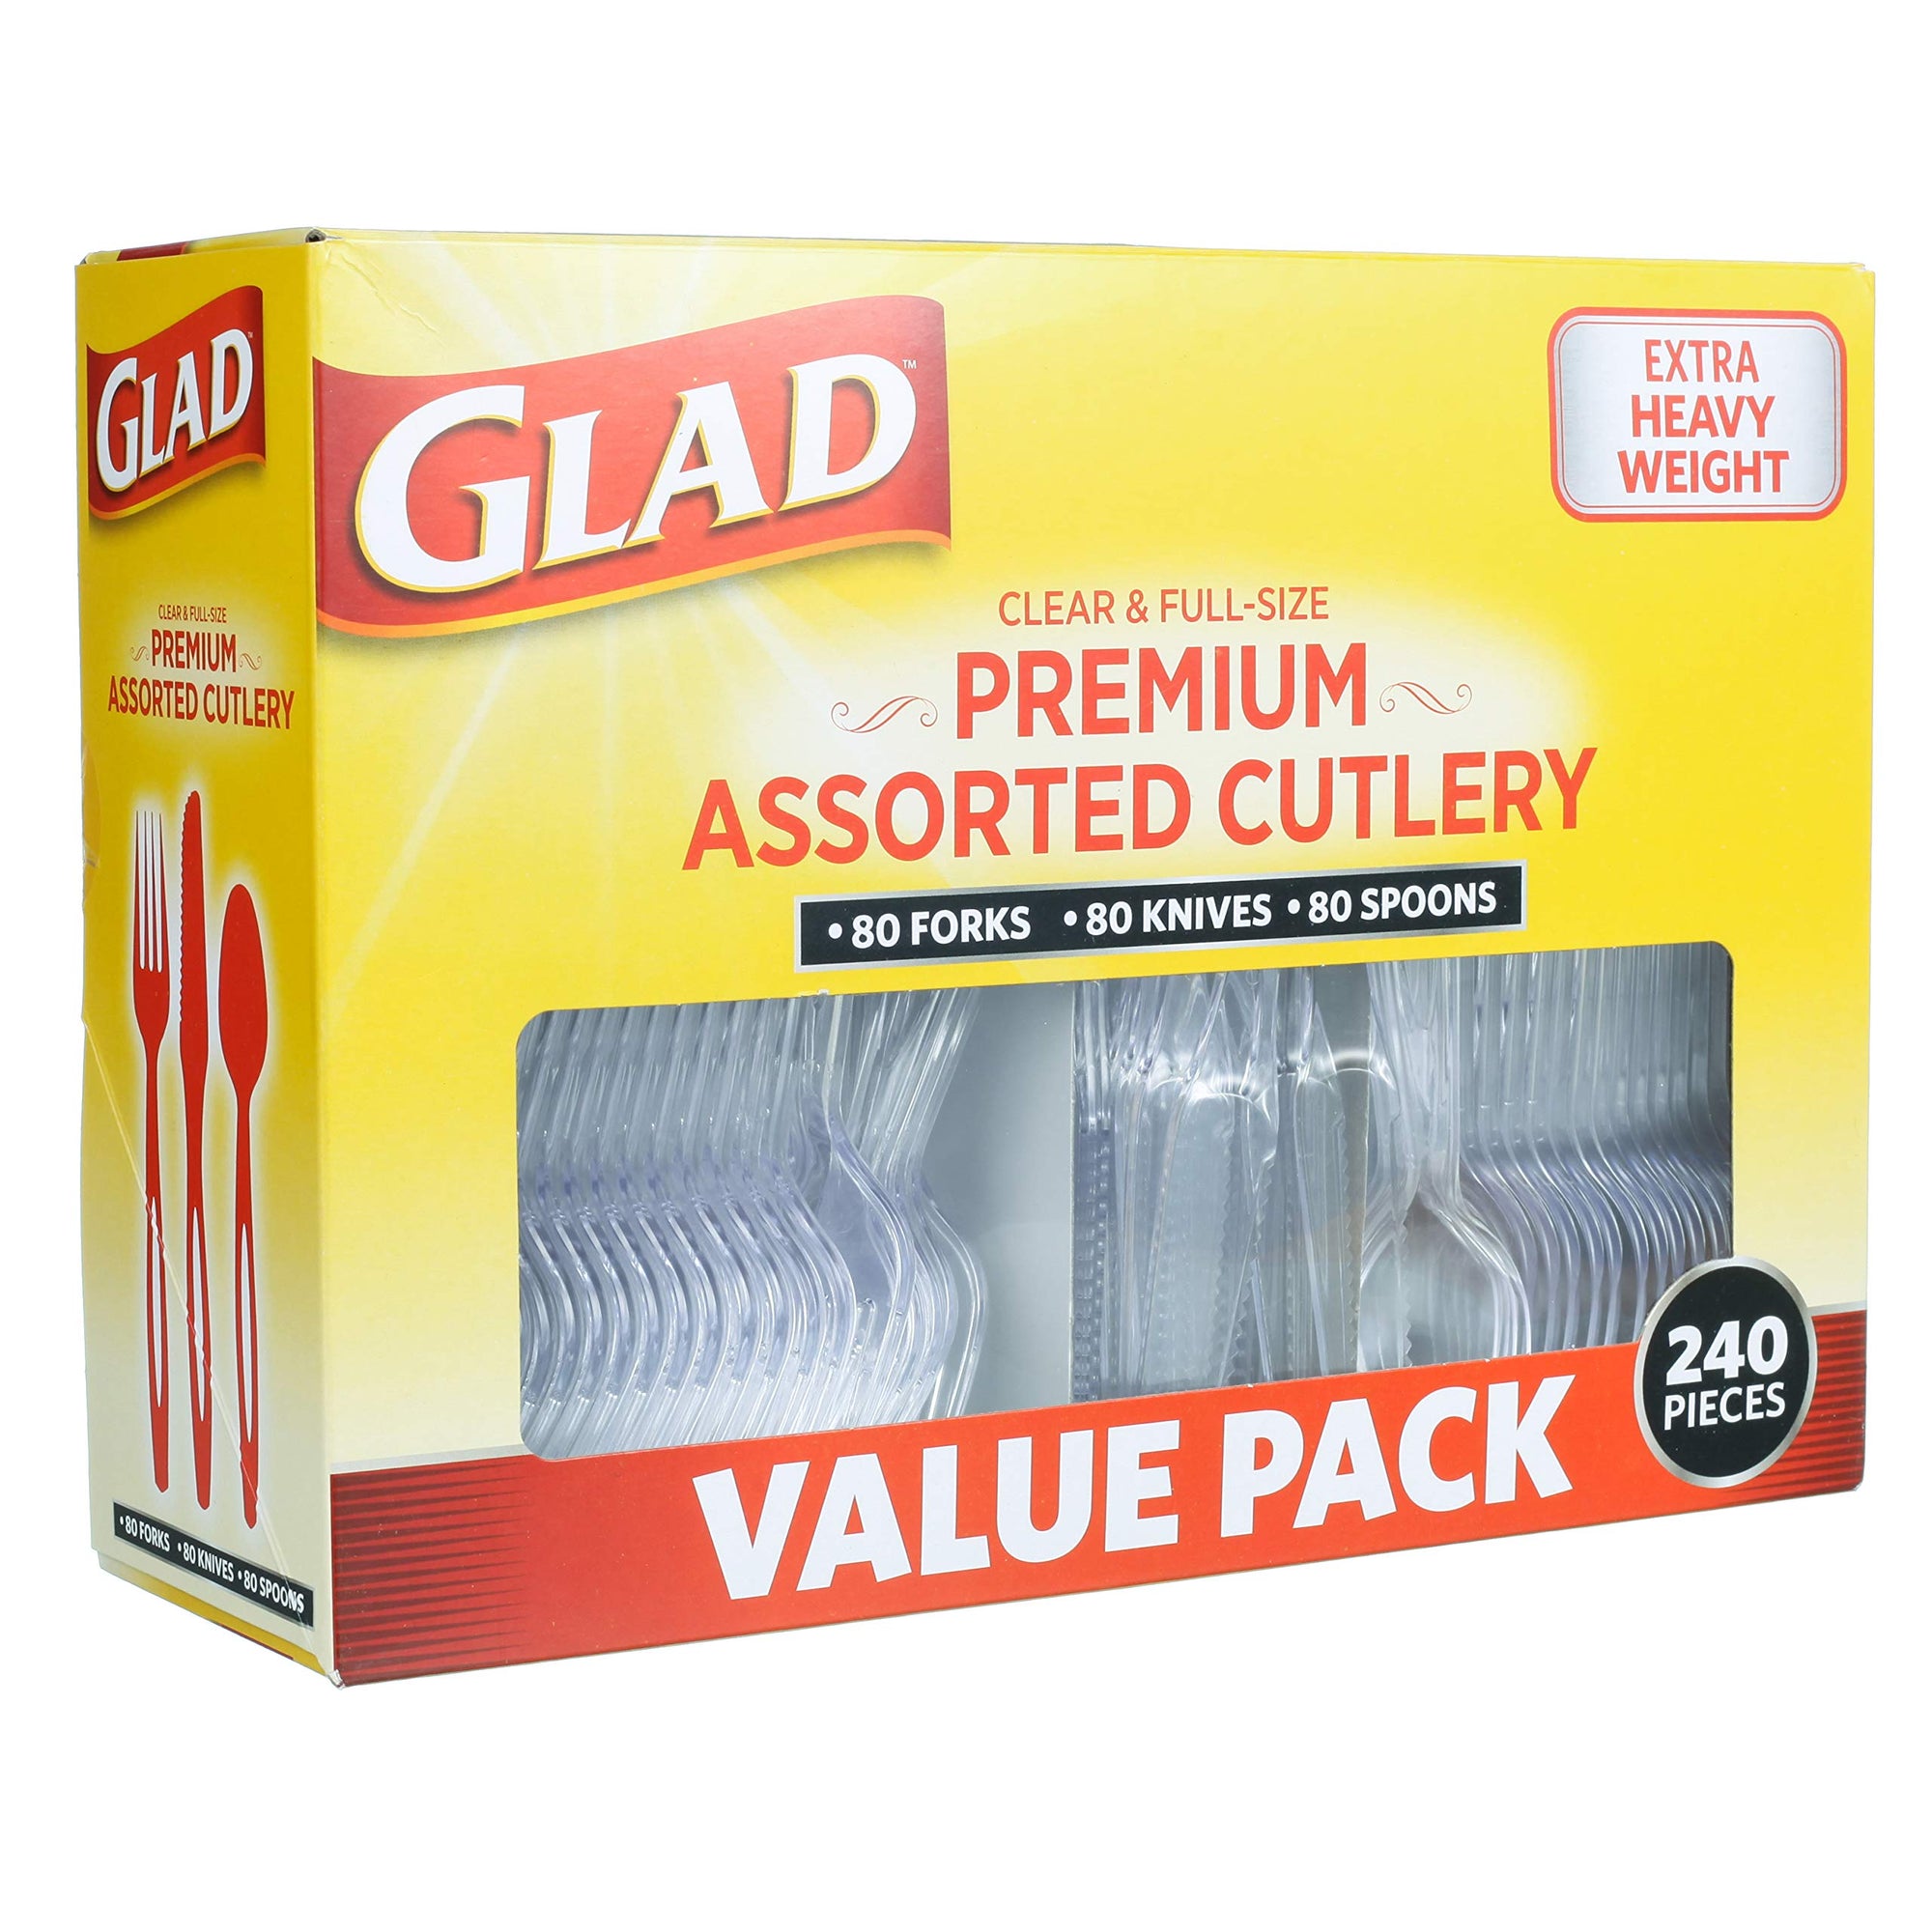 Glad Assorted Cutlery 240ct